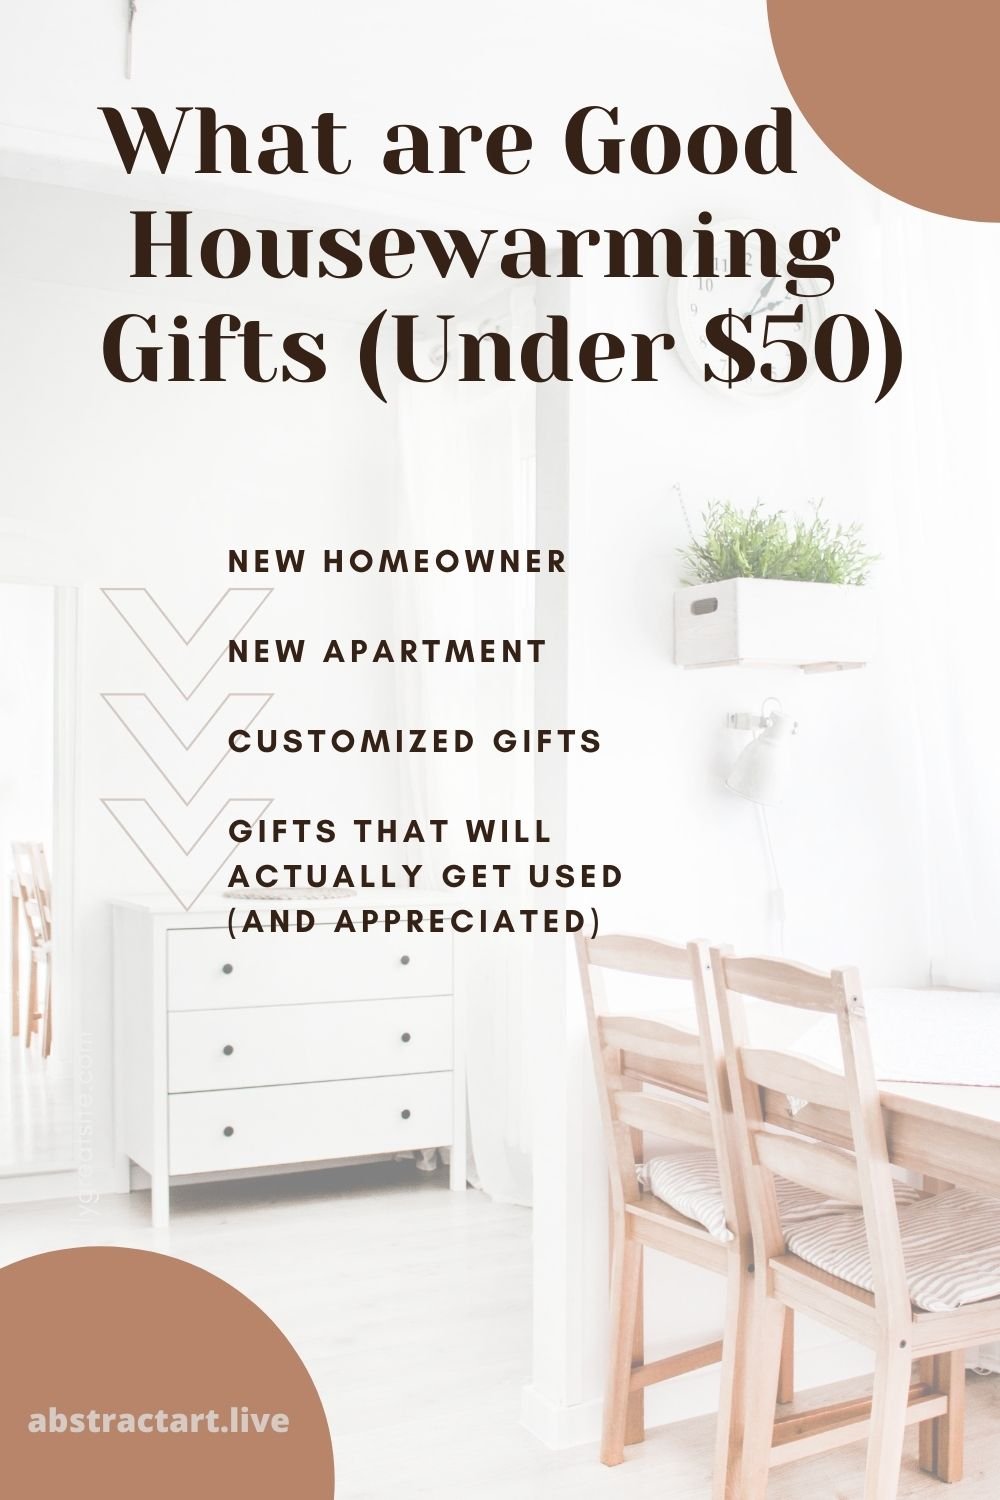 What are Good Housewarming Gifts (Under $50), New Home and Apartment